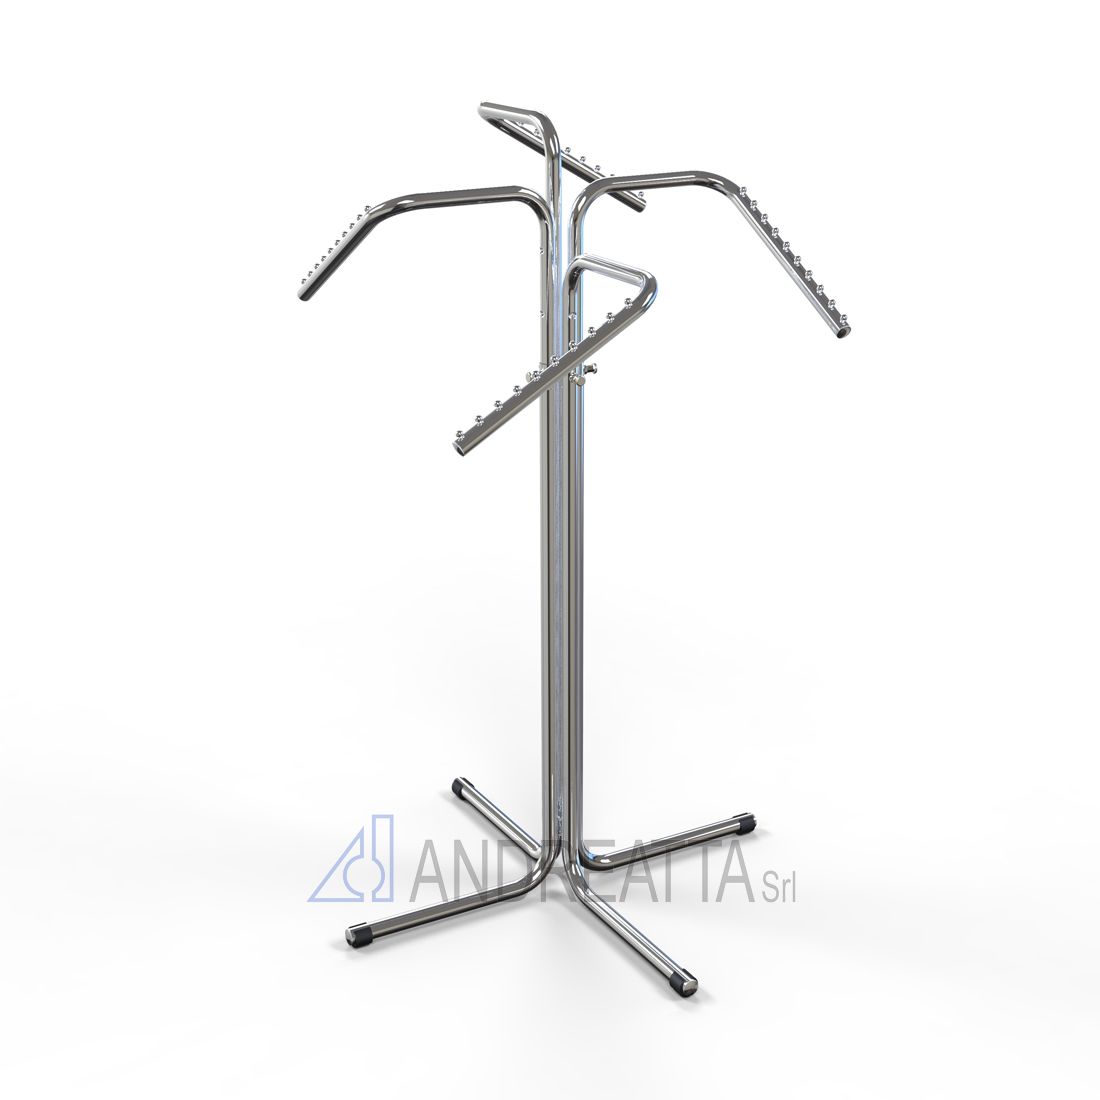 4 arms stand, Adjustable in height